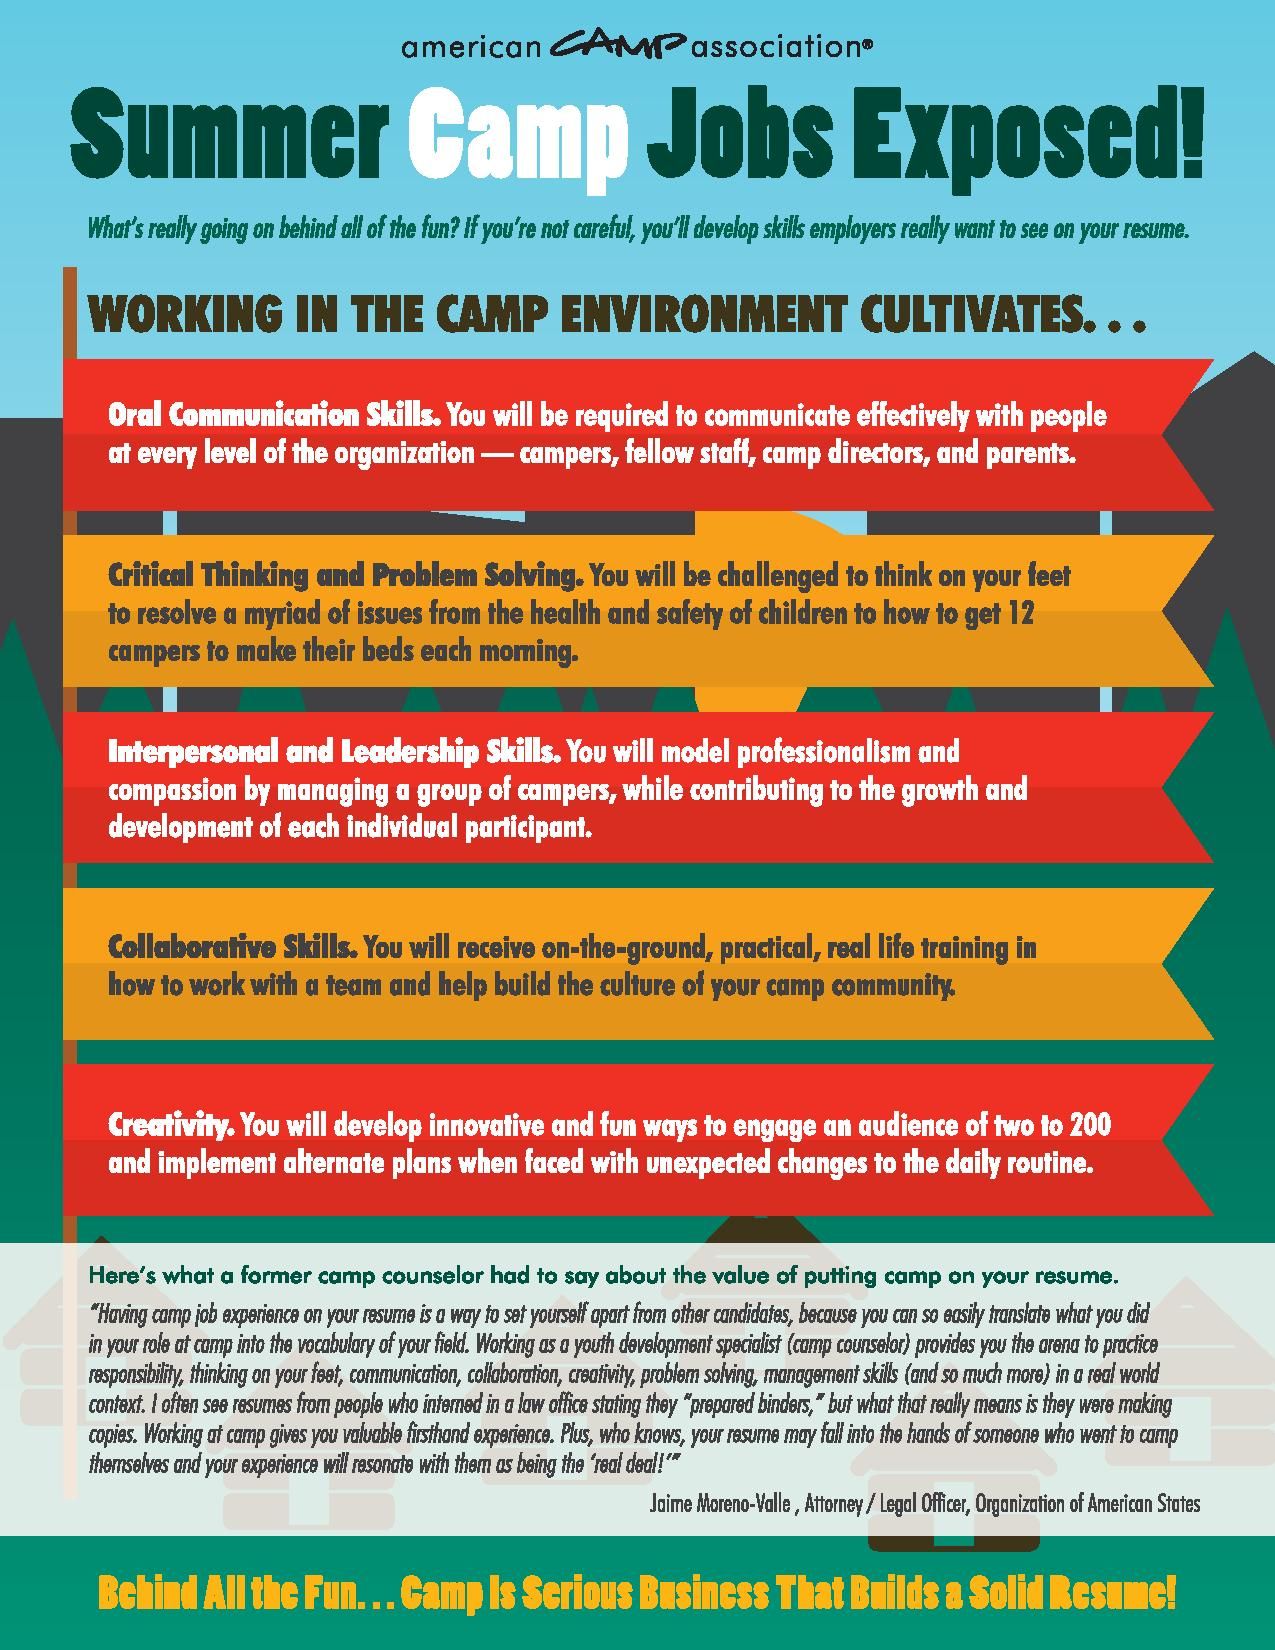 Skills Cultivated By Camp Employment